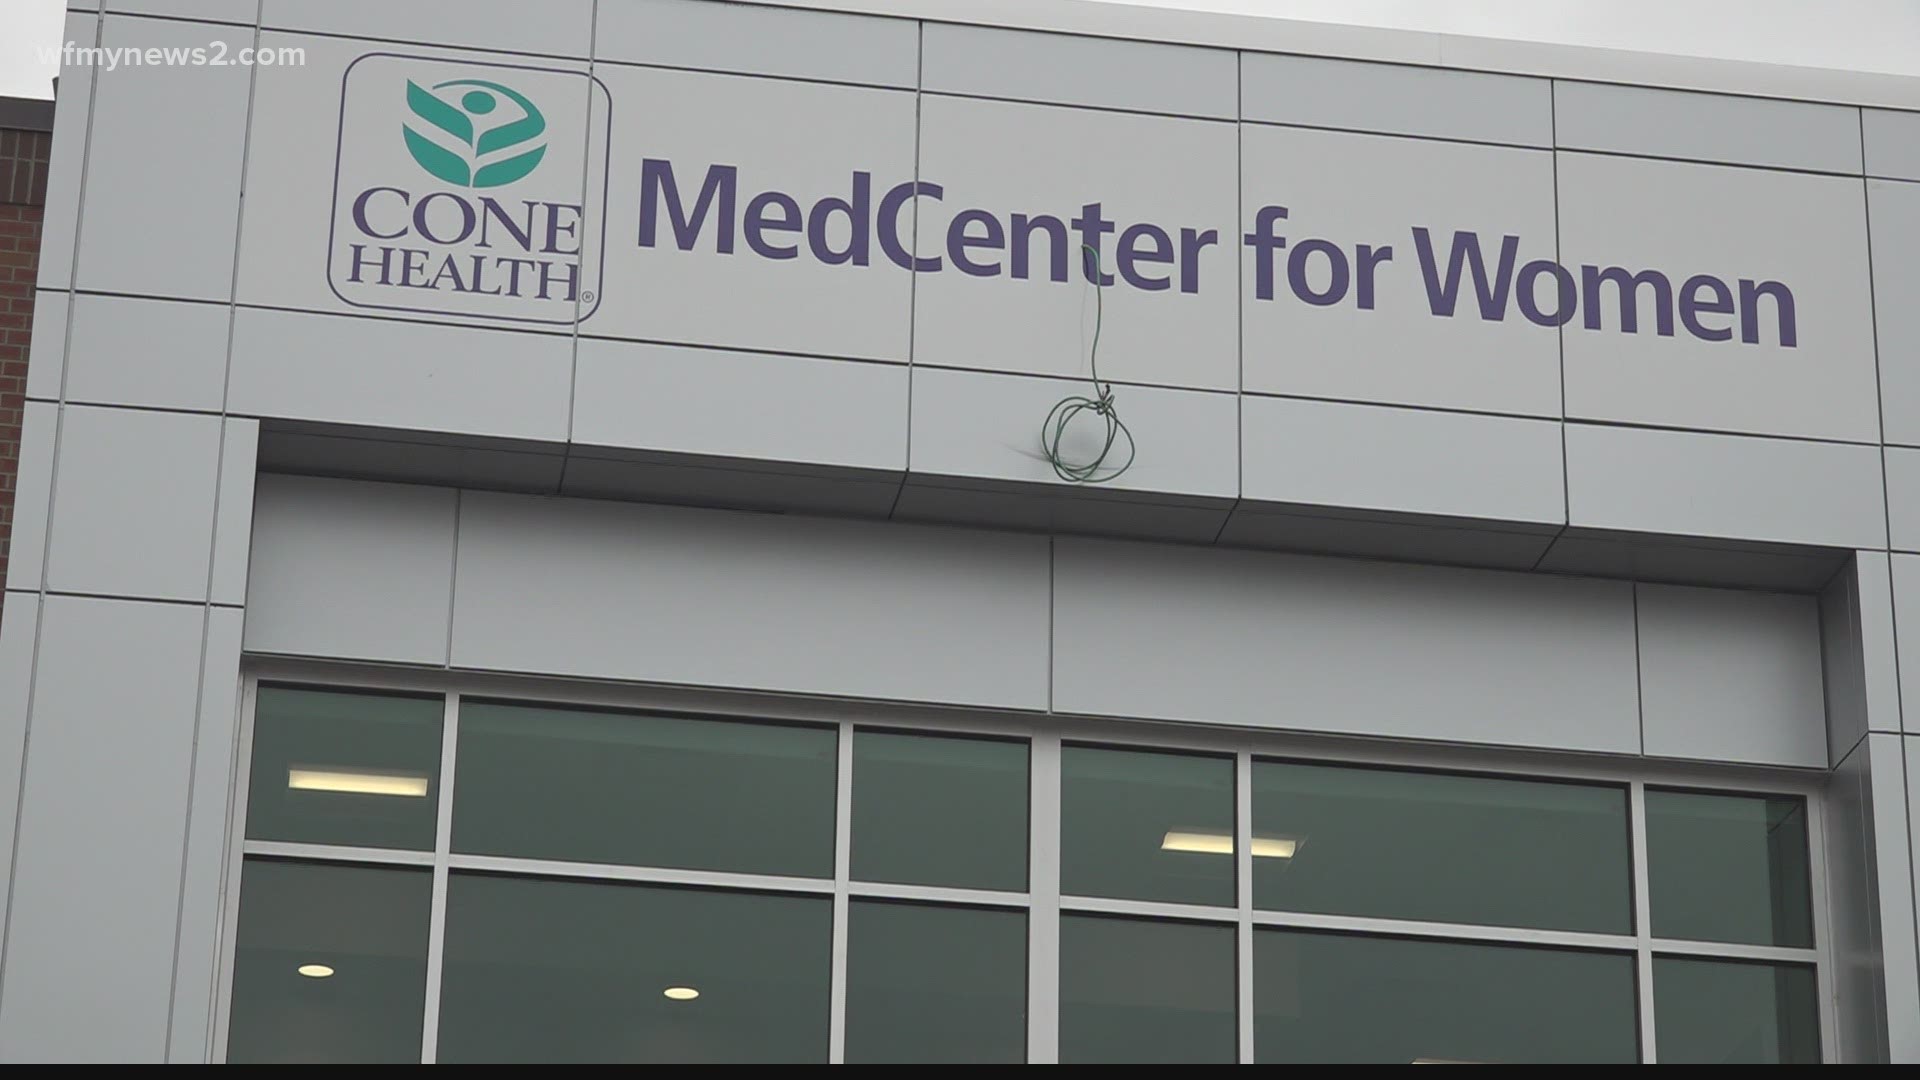 Just minutes from Cone Health's main campus, this new facility is ready to help make health care more accessible for women all across the Triad.